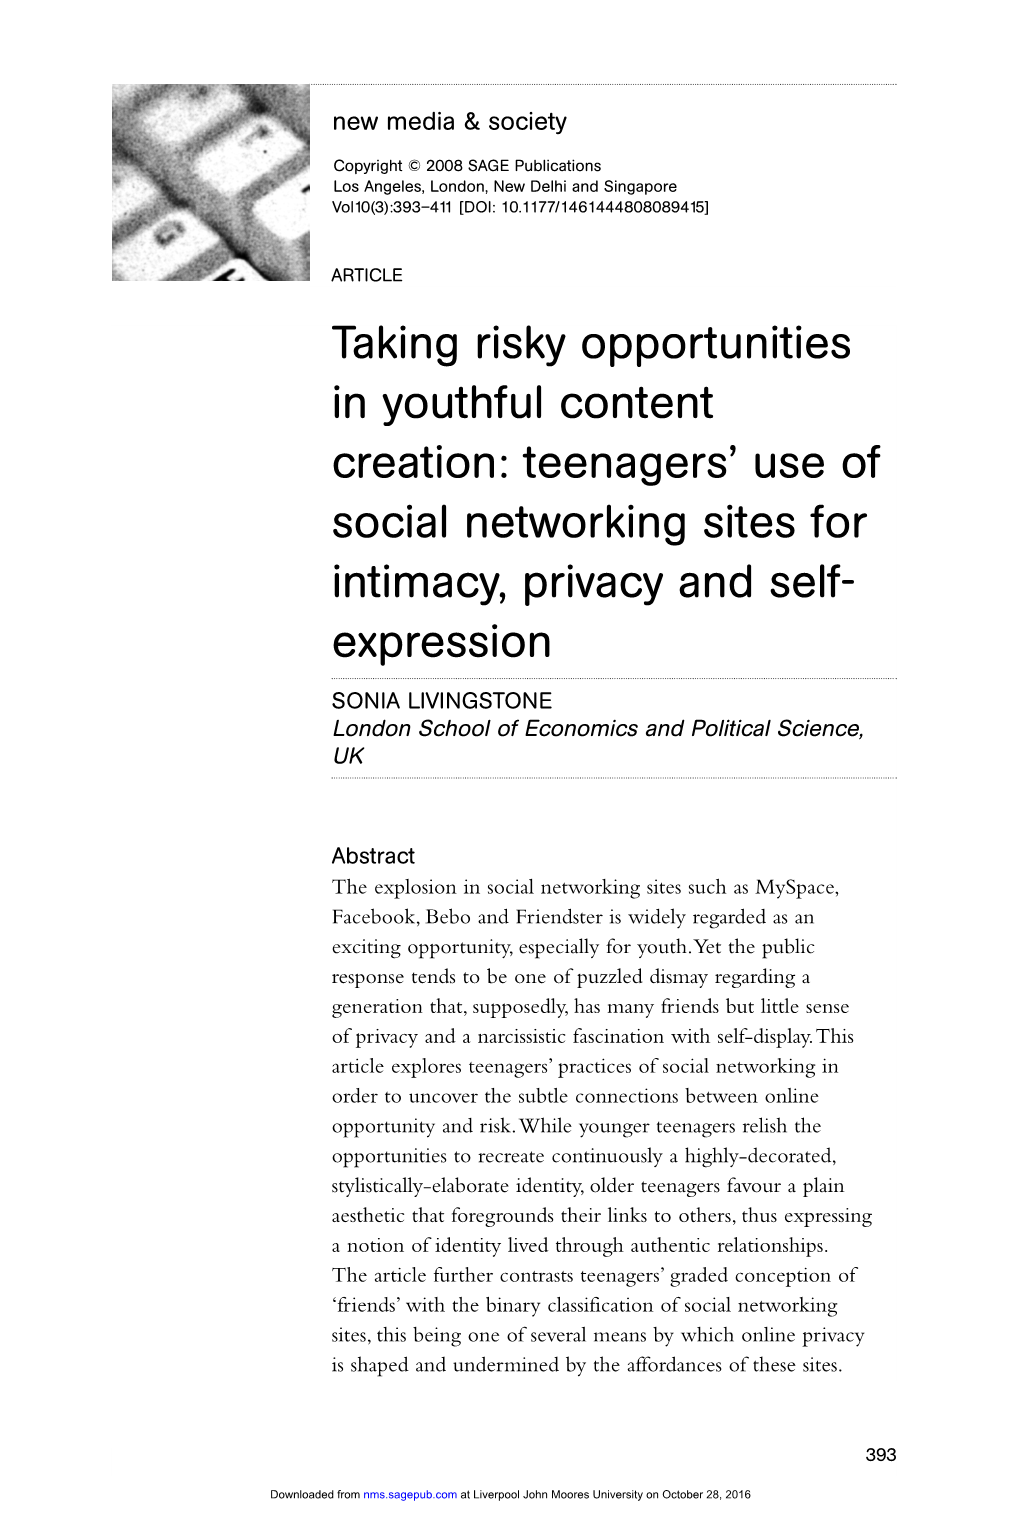 Teenagers' Use of Social Networking Sites for Intimacy, Privacy and S